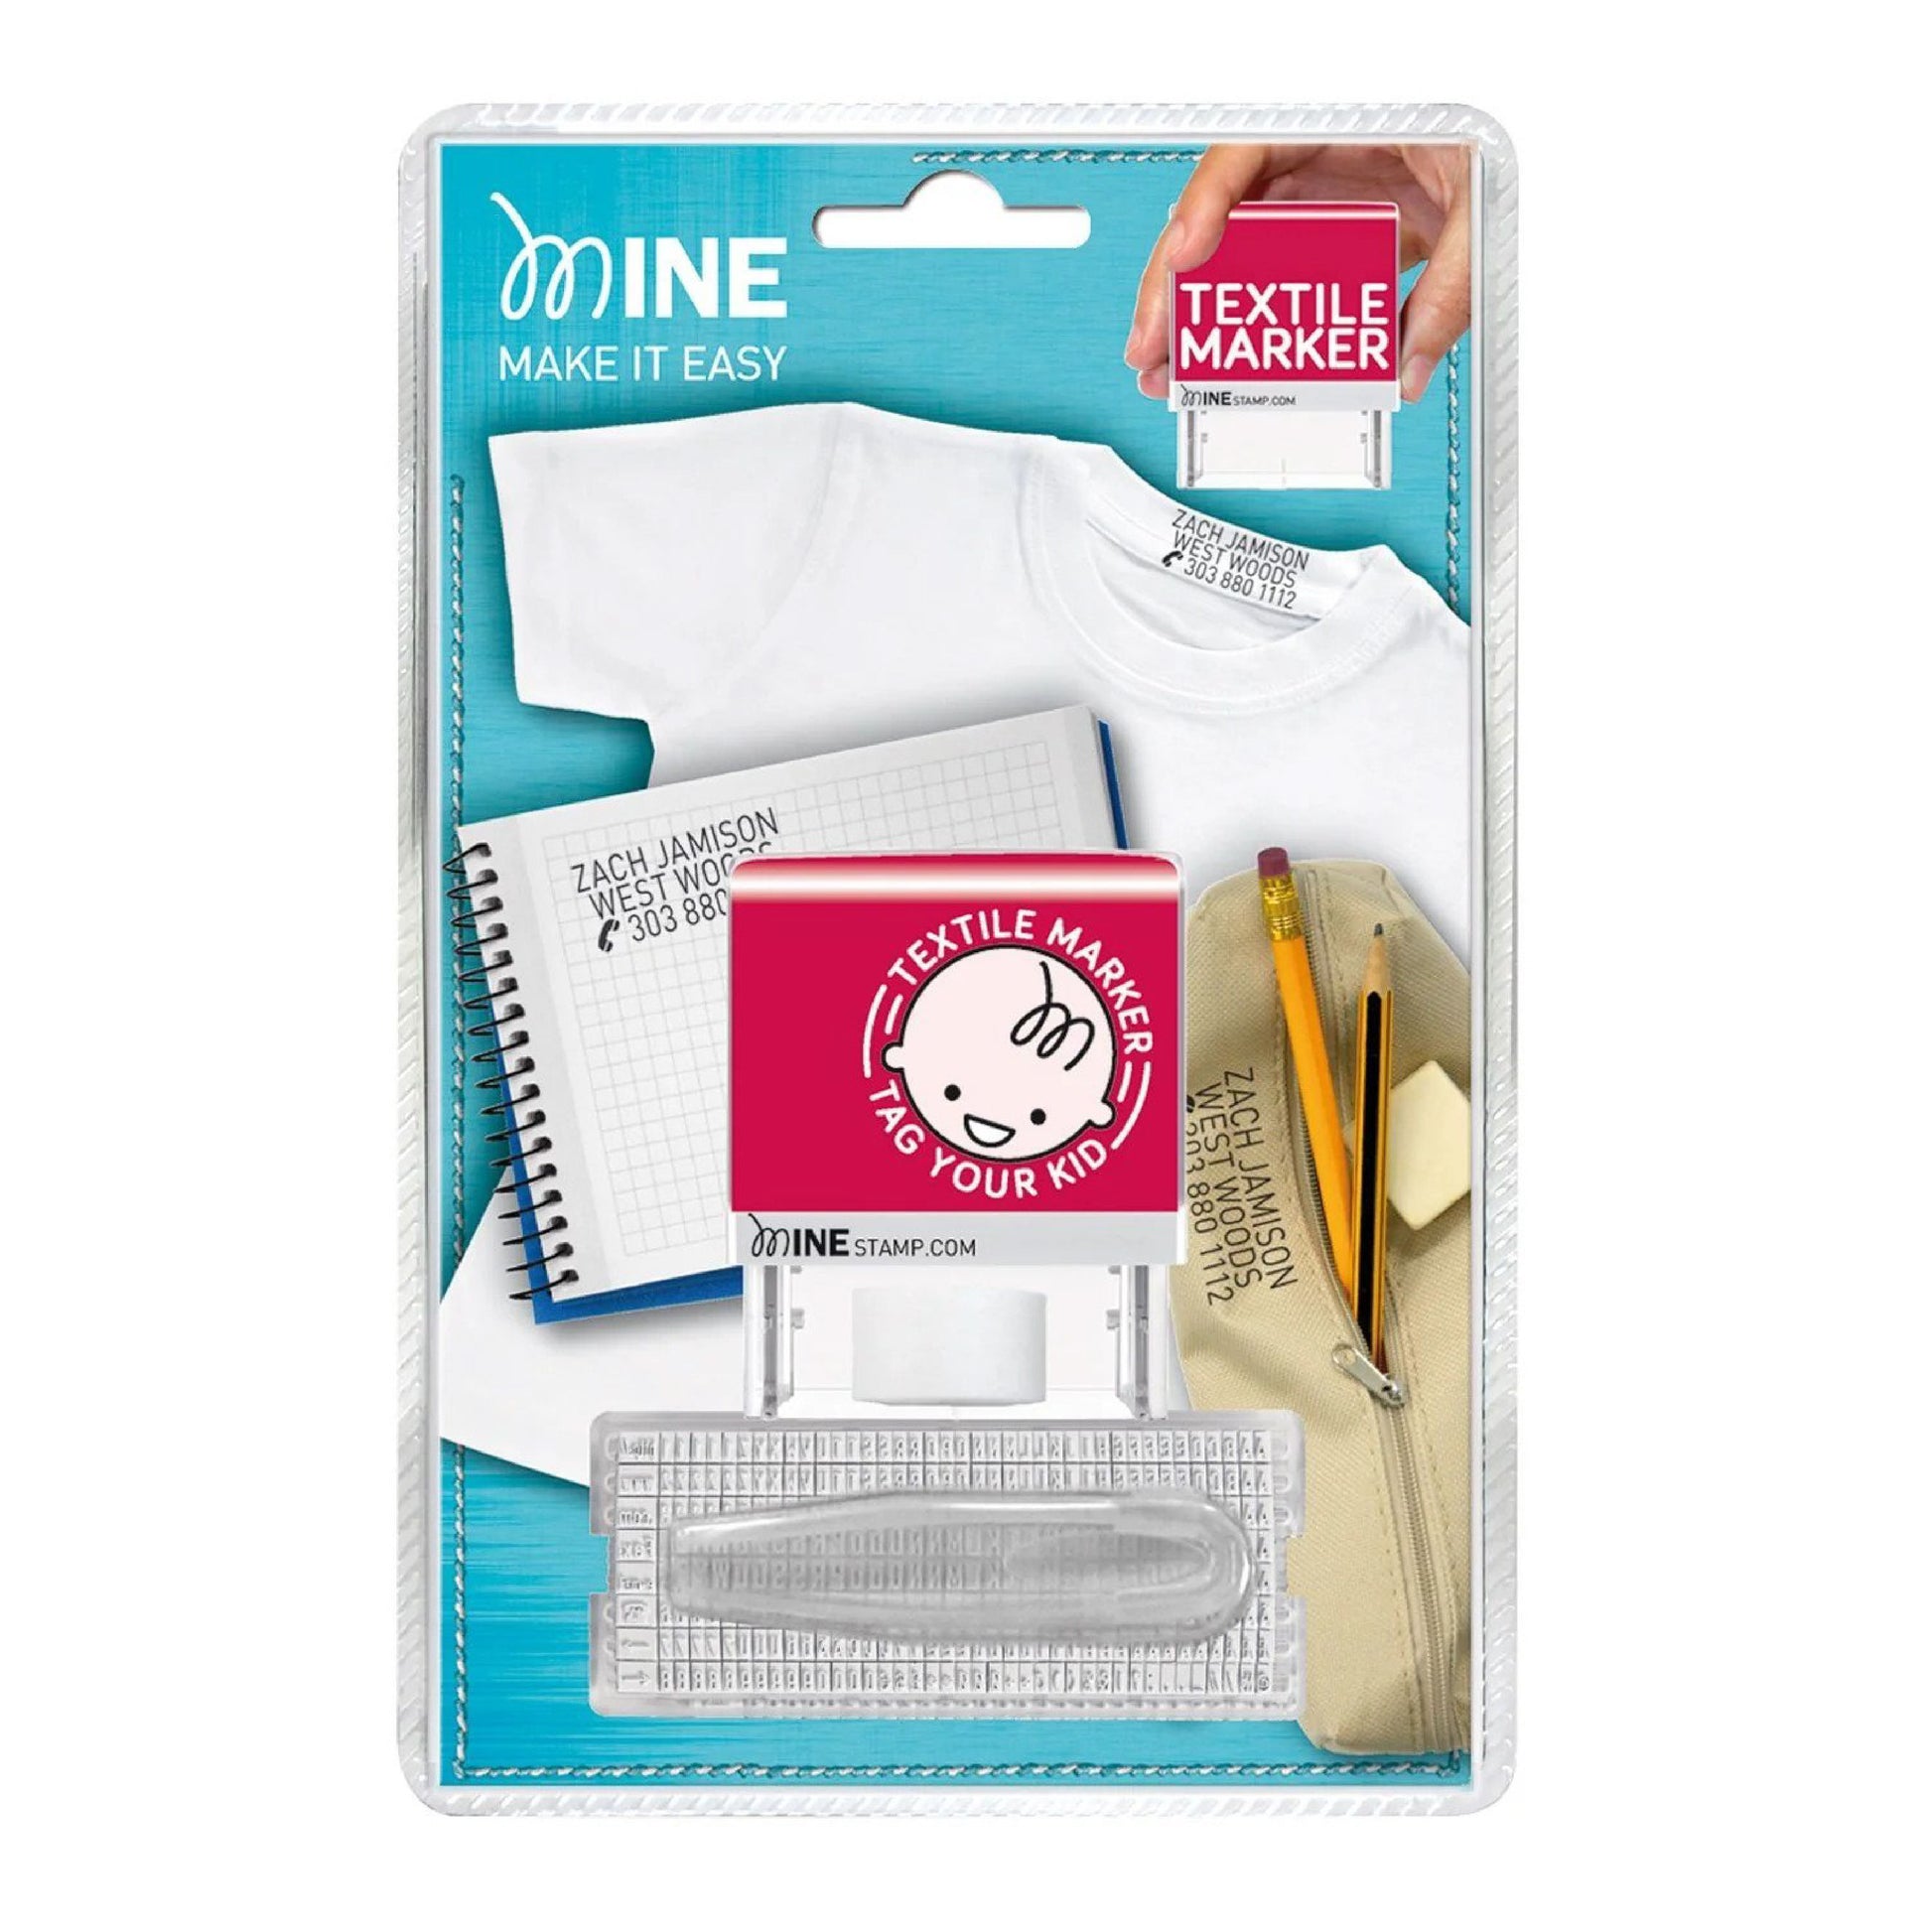 MINEstamp Textile & Clothing Marker DIY Stamp Set - Create personalized and permanent markings on textiles with this versatile stamp set for clothing customization.